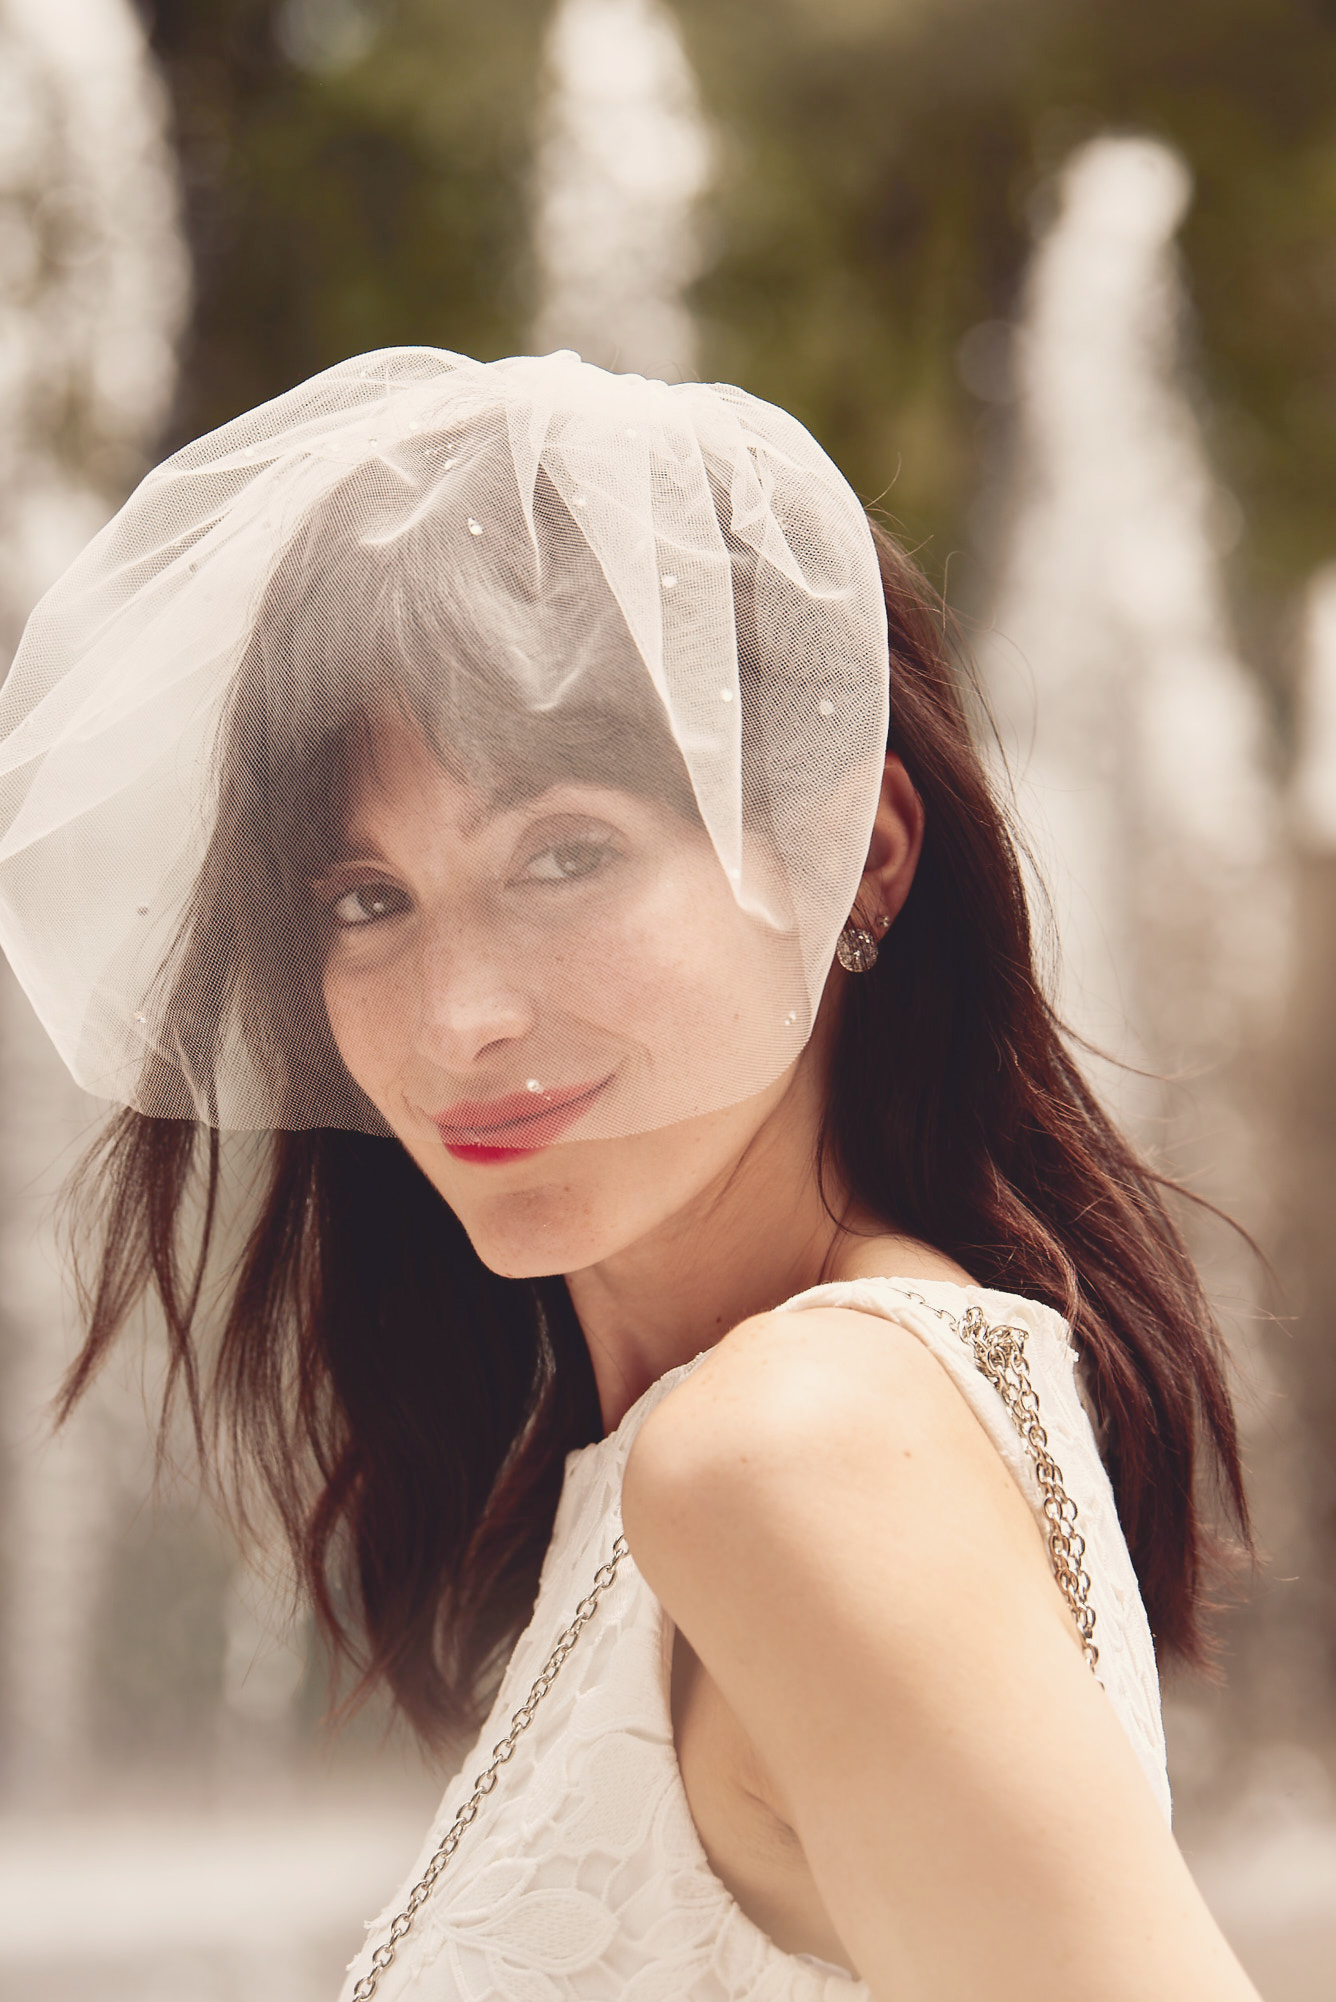 Smirking bride wearing tulle birdcage veil covering her face